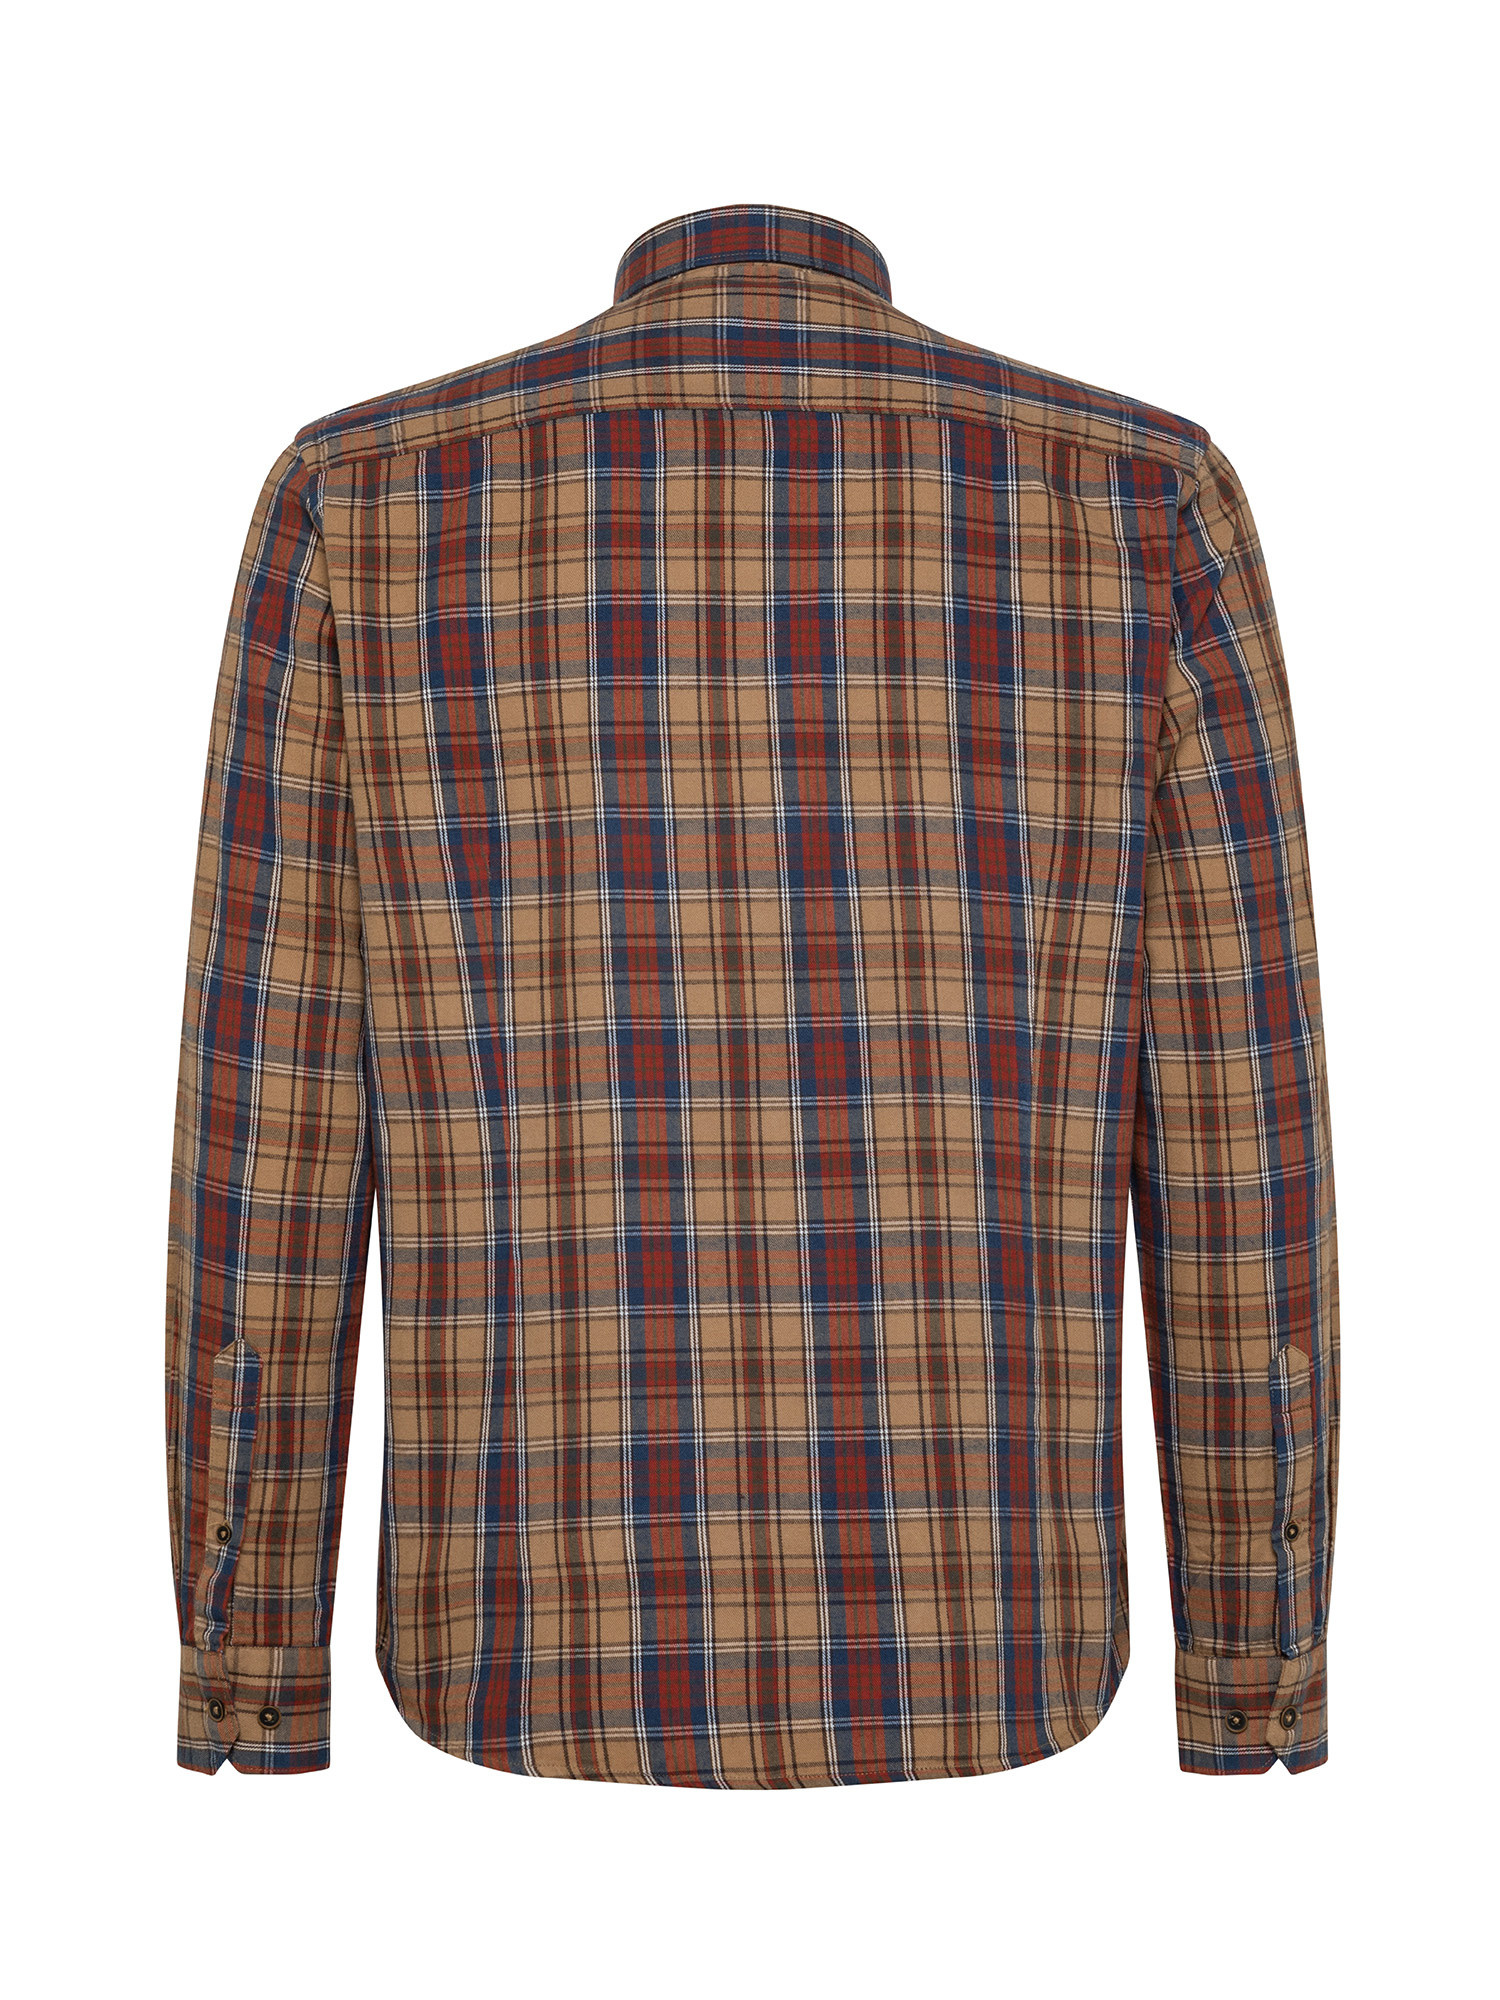 JCT - Checked shirt in soft flannel, Orange, large image number 1